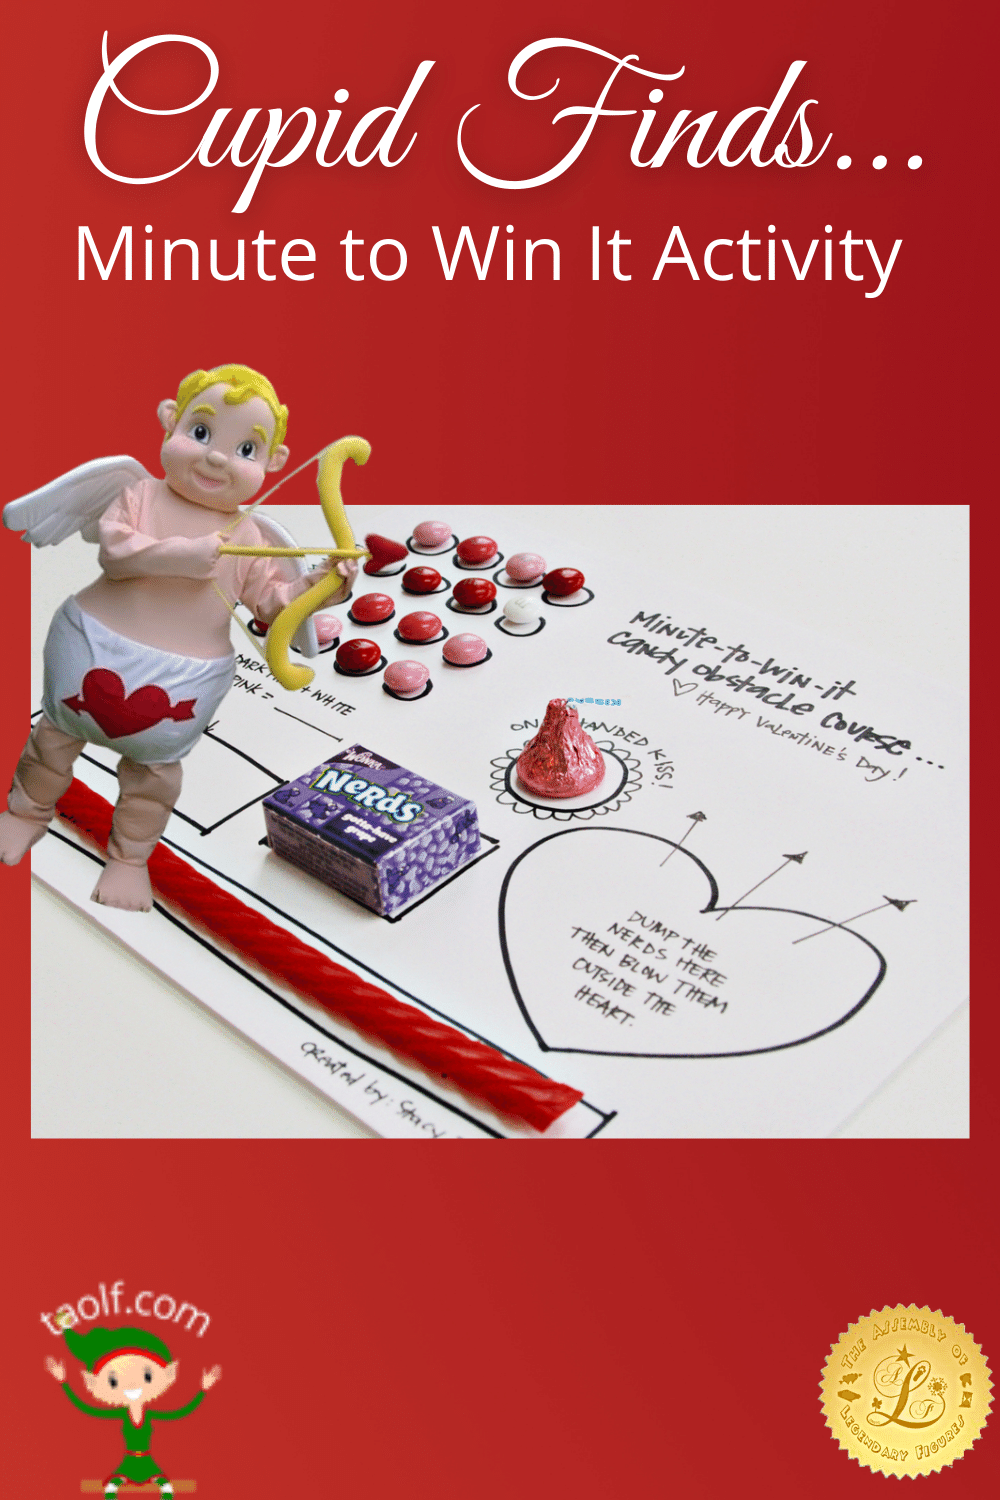 Cupid's Minute to Win It Activity Found